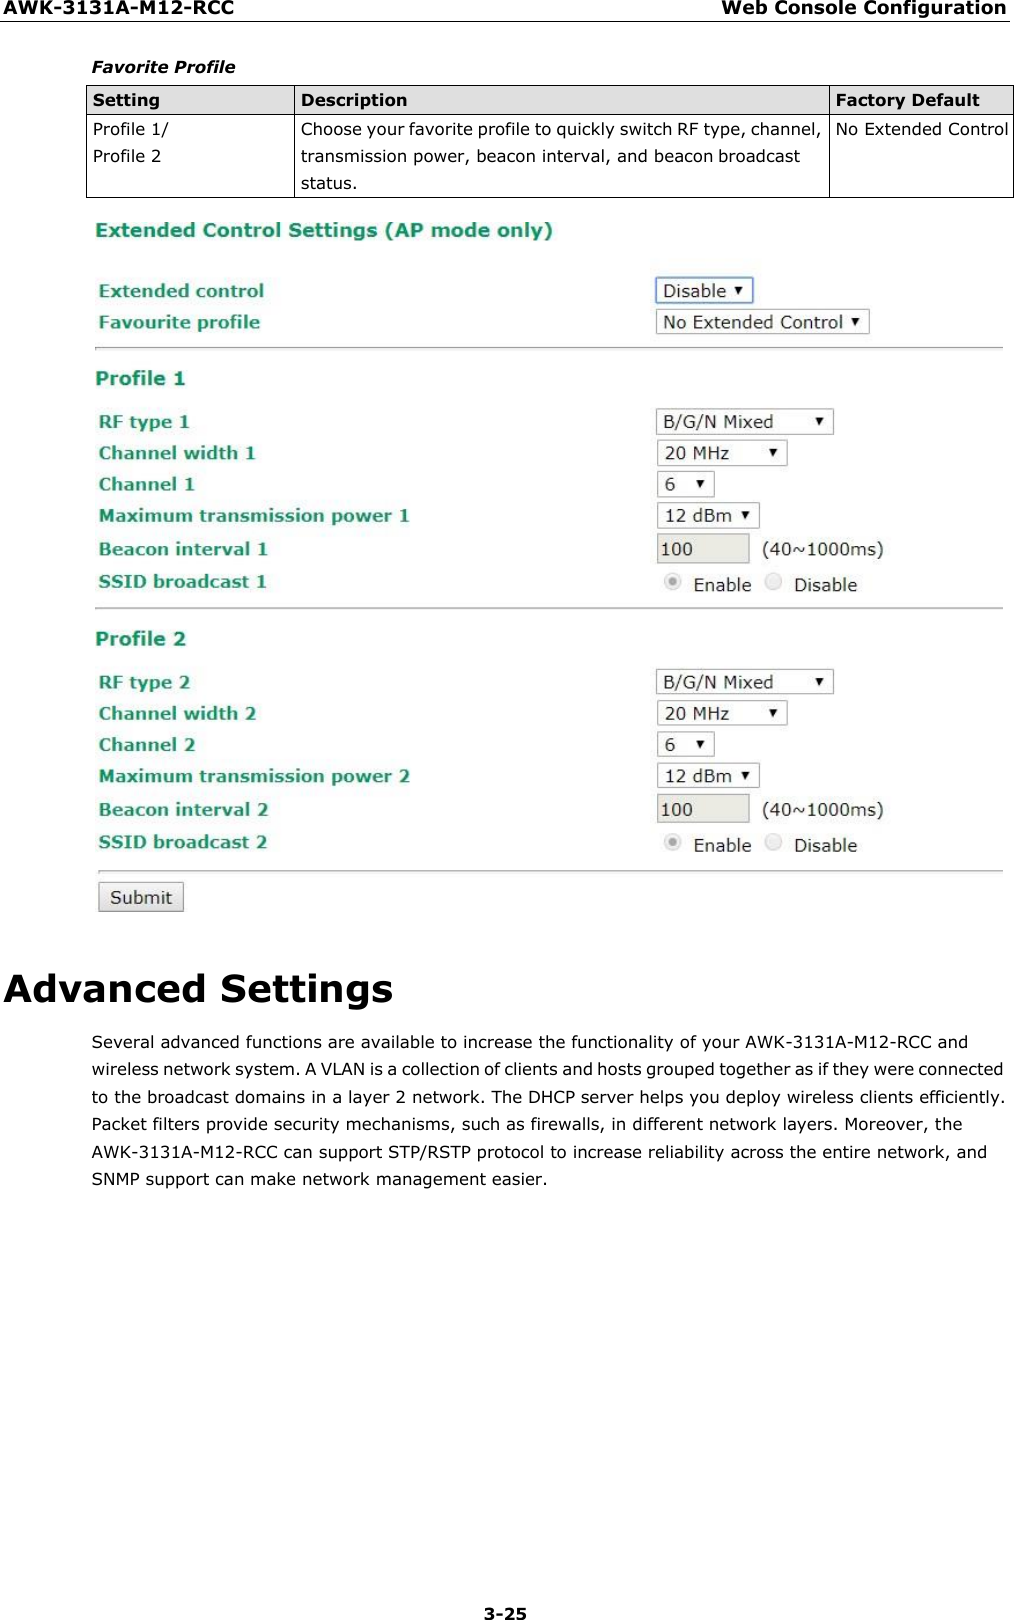 AWK-3131A-M12-RCC Web Console Configuration 3-25    Favorite Profile  Setting Description Factory Default Profile 1/ Profile 2 Choose your favorite profile to quickly switch RF type, channel, transmission power, beacon interval, and beacon broadcast status. No Extended Control    Advanced Settings Several advanced functions are available to increase the functionality of your AWK-3131A-M12-RCC and wireless network system. A VLAN is a collection of clients and hosts grouped together as if they were connected to the broadcast domains in a layer 2 network. The DHCP server helps you deploy wireless clients efficiently. Packet filters provide security mechanisms, such as firewalls, in different network layers. Moreover, the AWK-3131A-M12-RCC can support STP/RSTP protocol to increase reliability across the entire network, and SNMP support can make network management easier. 